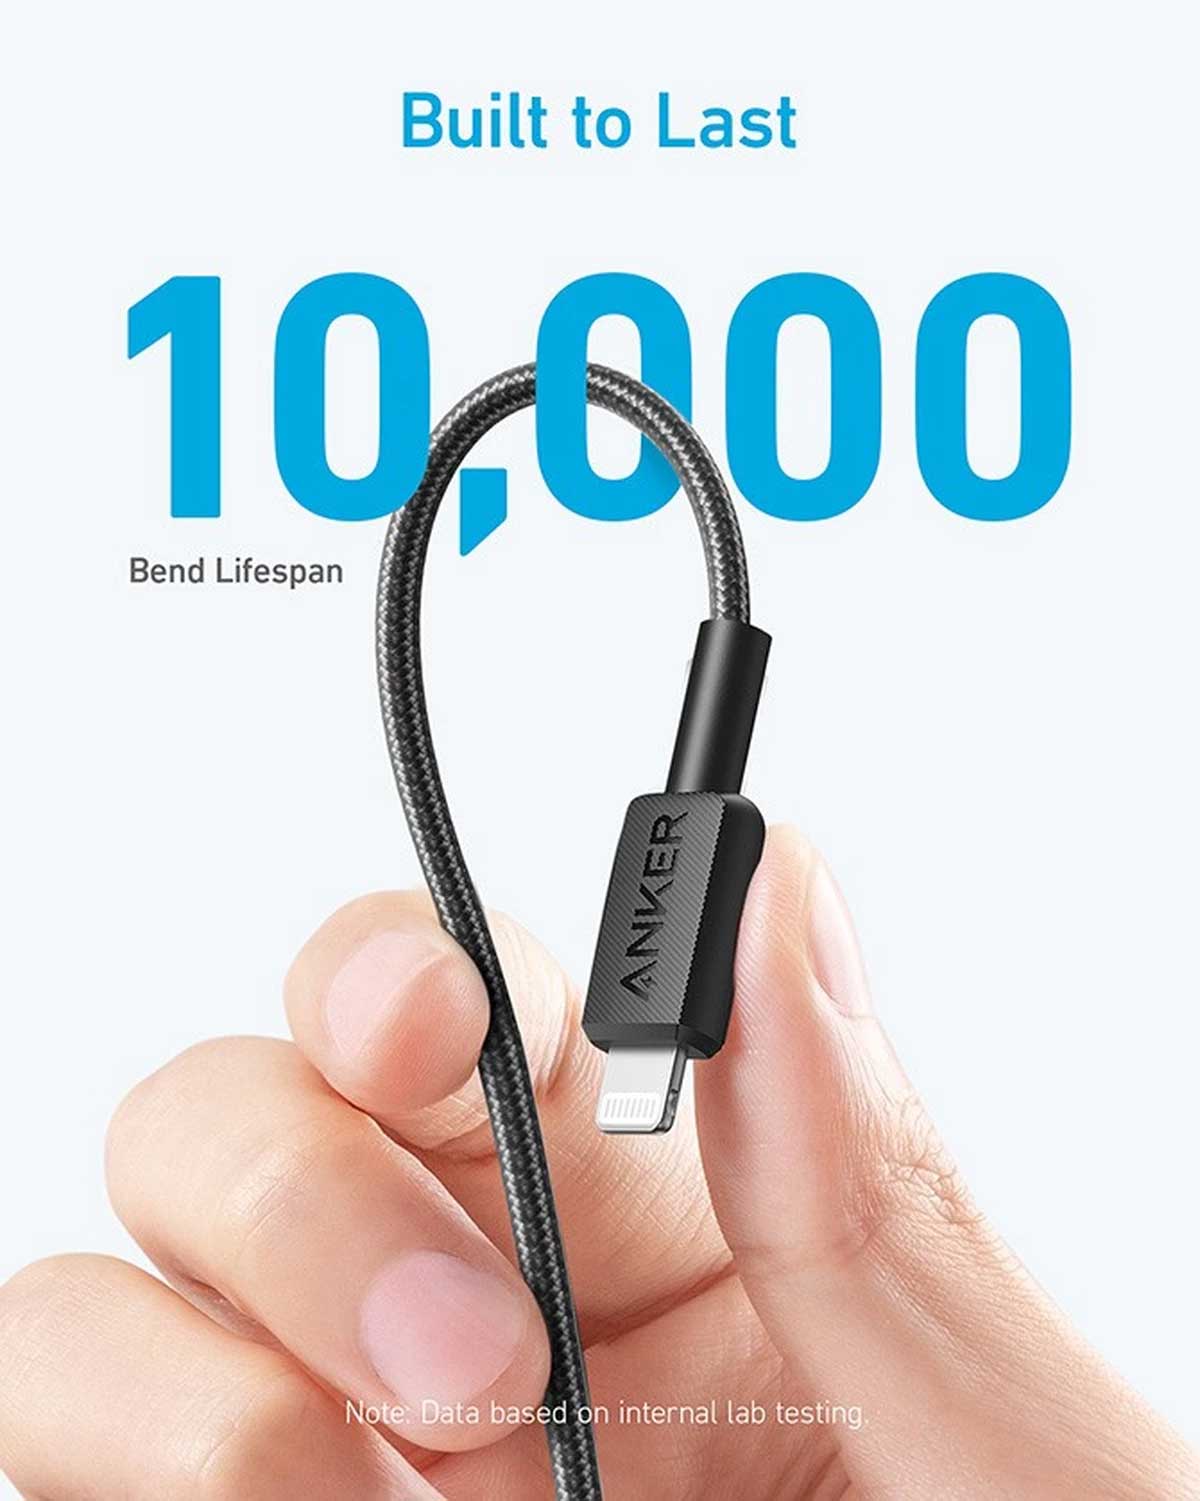 Anker 322 USB C to MFI Lightning Cable 4